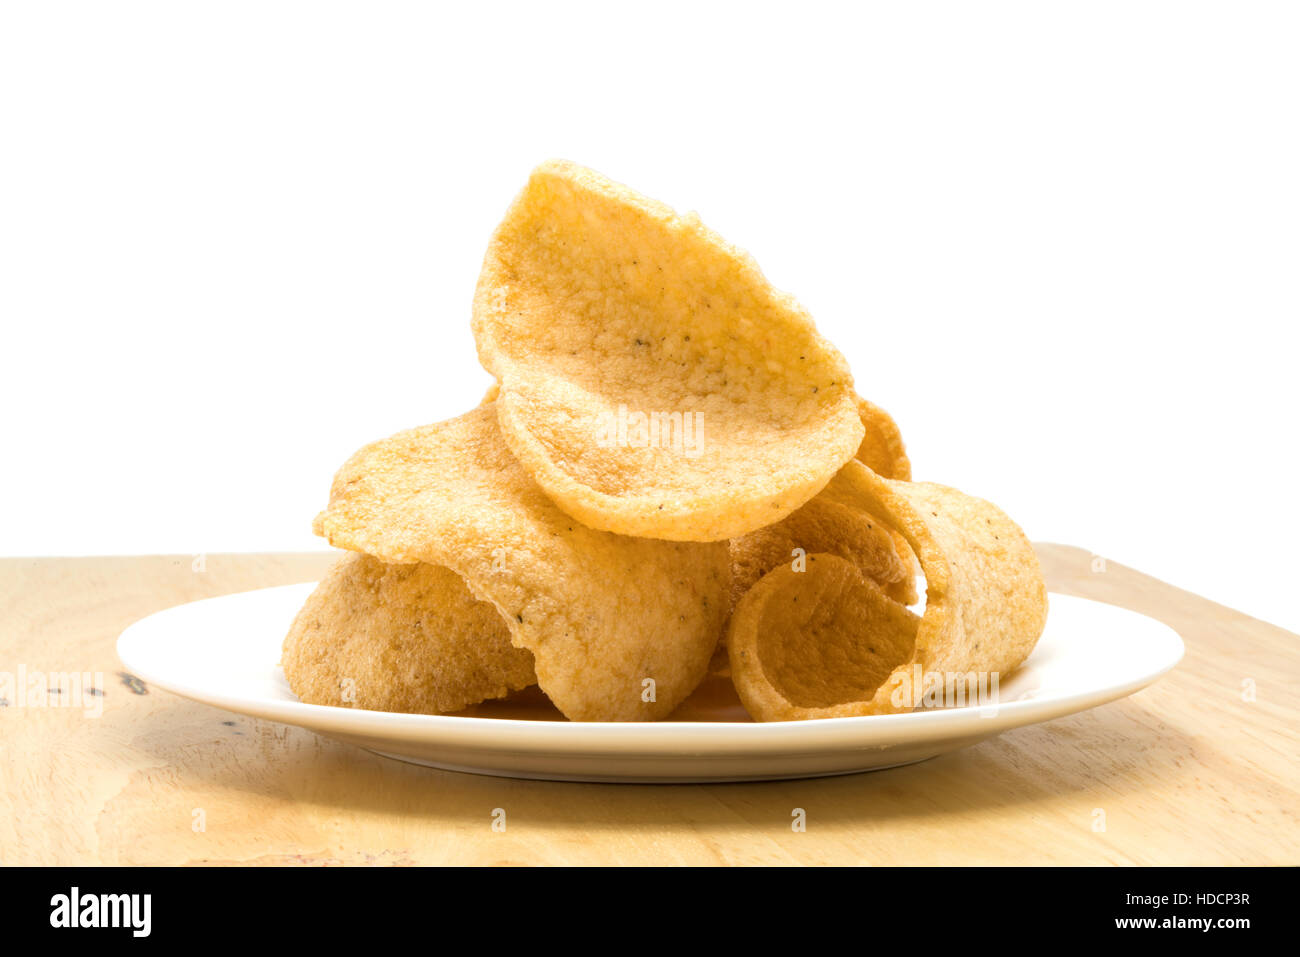 Pile of crunchy prawn cracker in a white plate on a wooden board on white background Stock Photo